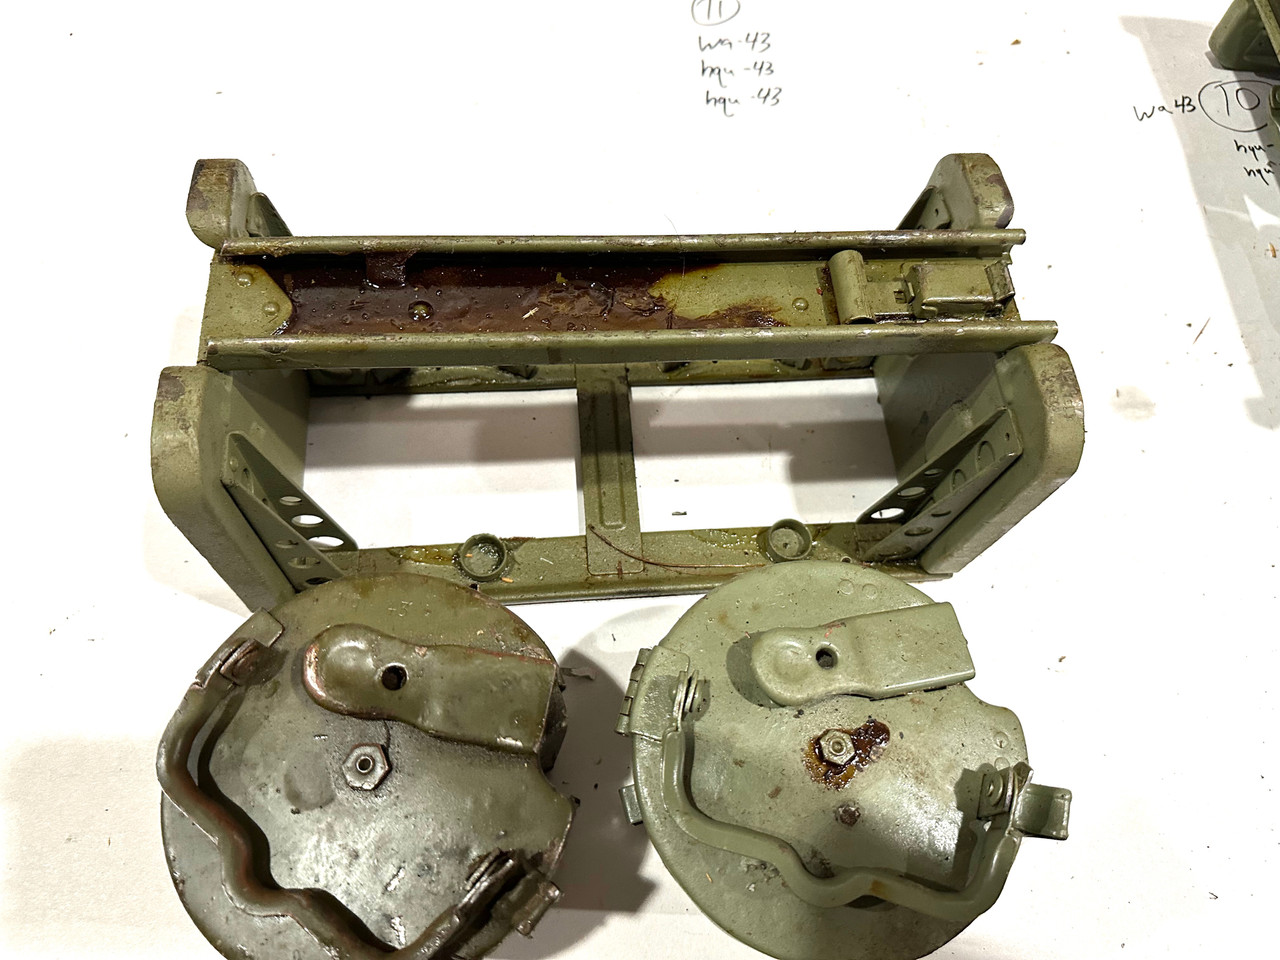 230909-11:  Original WW2 dated Basket Drum and Carrier Set  (Yugo Repainted)  (SHIPS FREE in Lower 48)